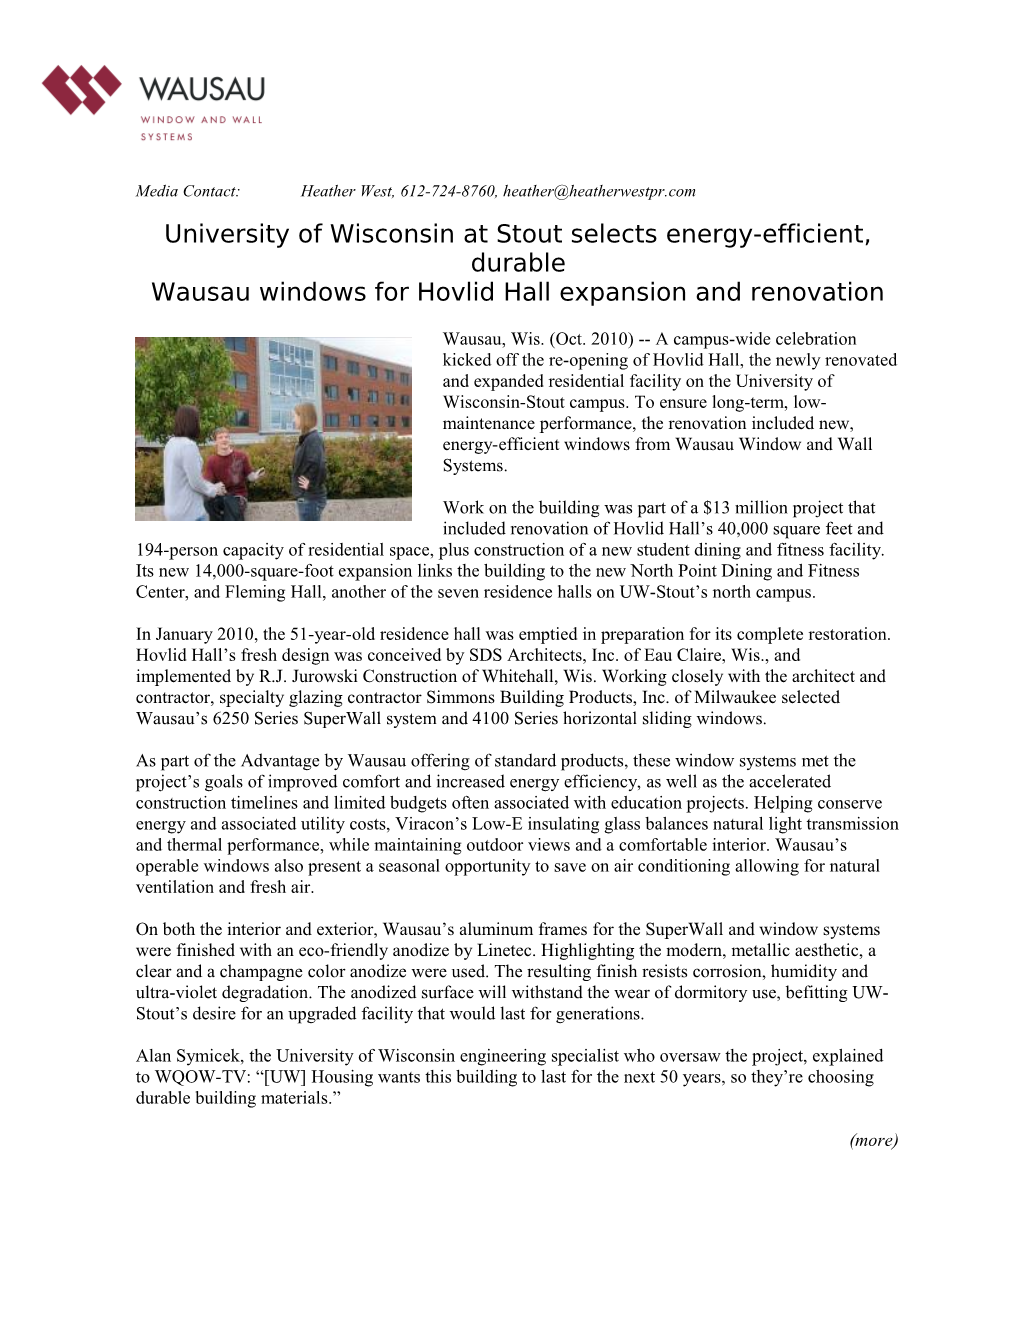 University of Wisconsin at Stout Selects Energy-Efficient, Durable